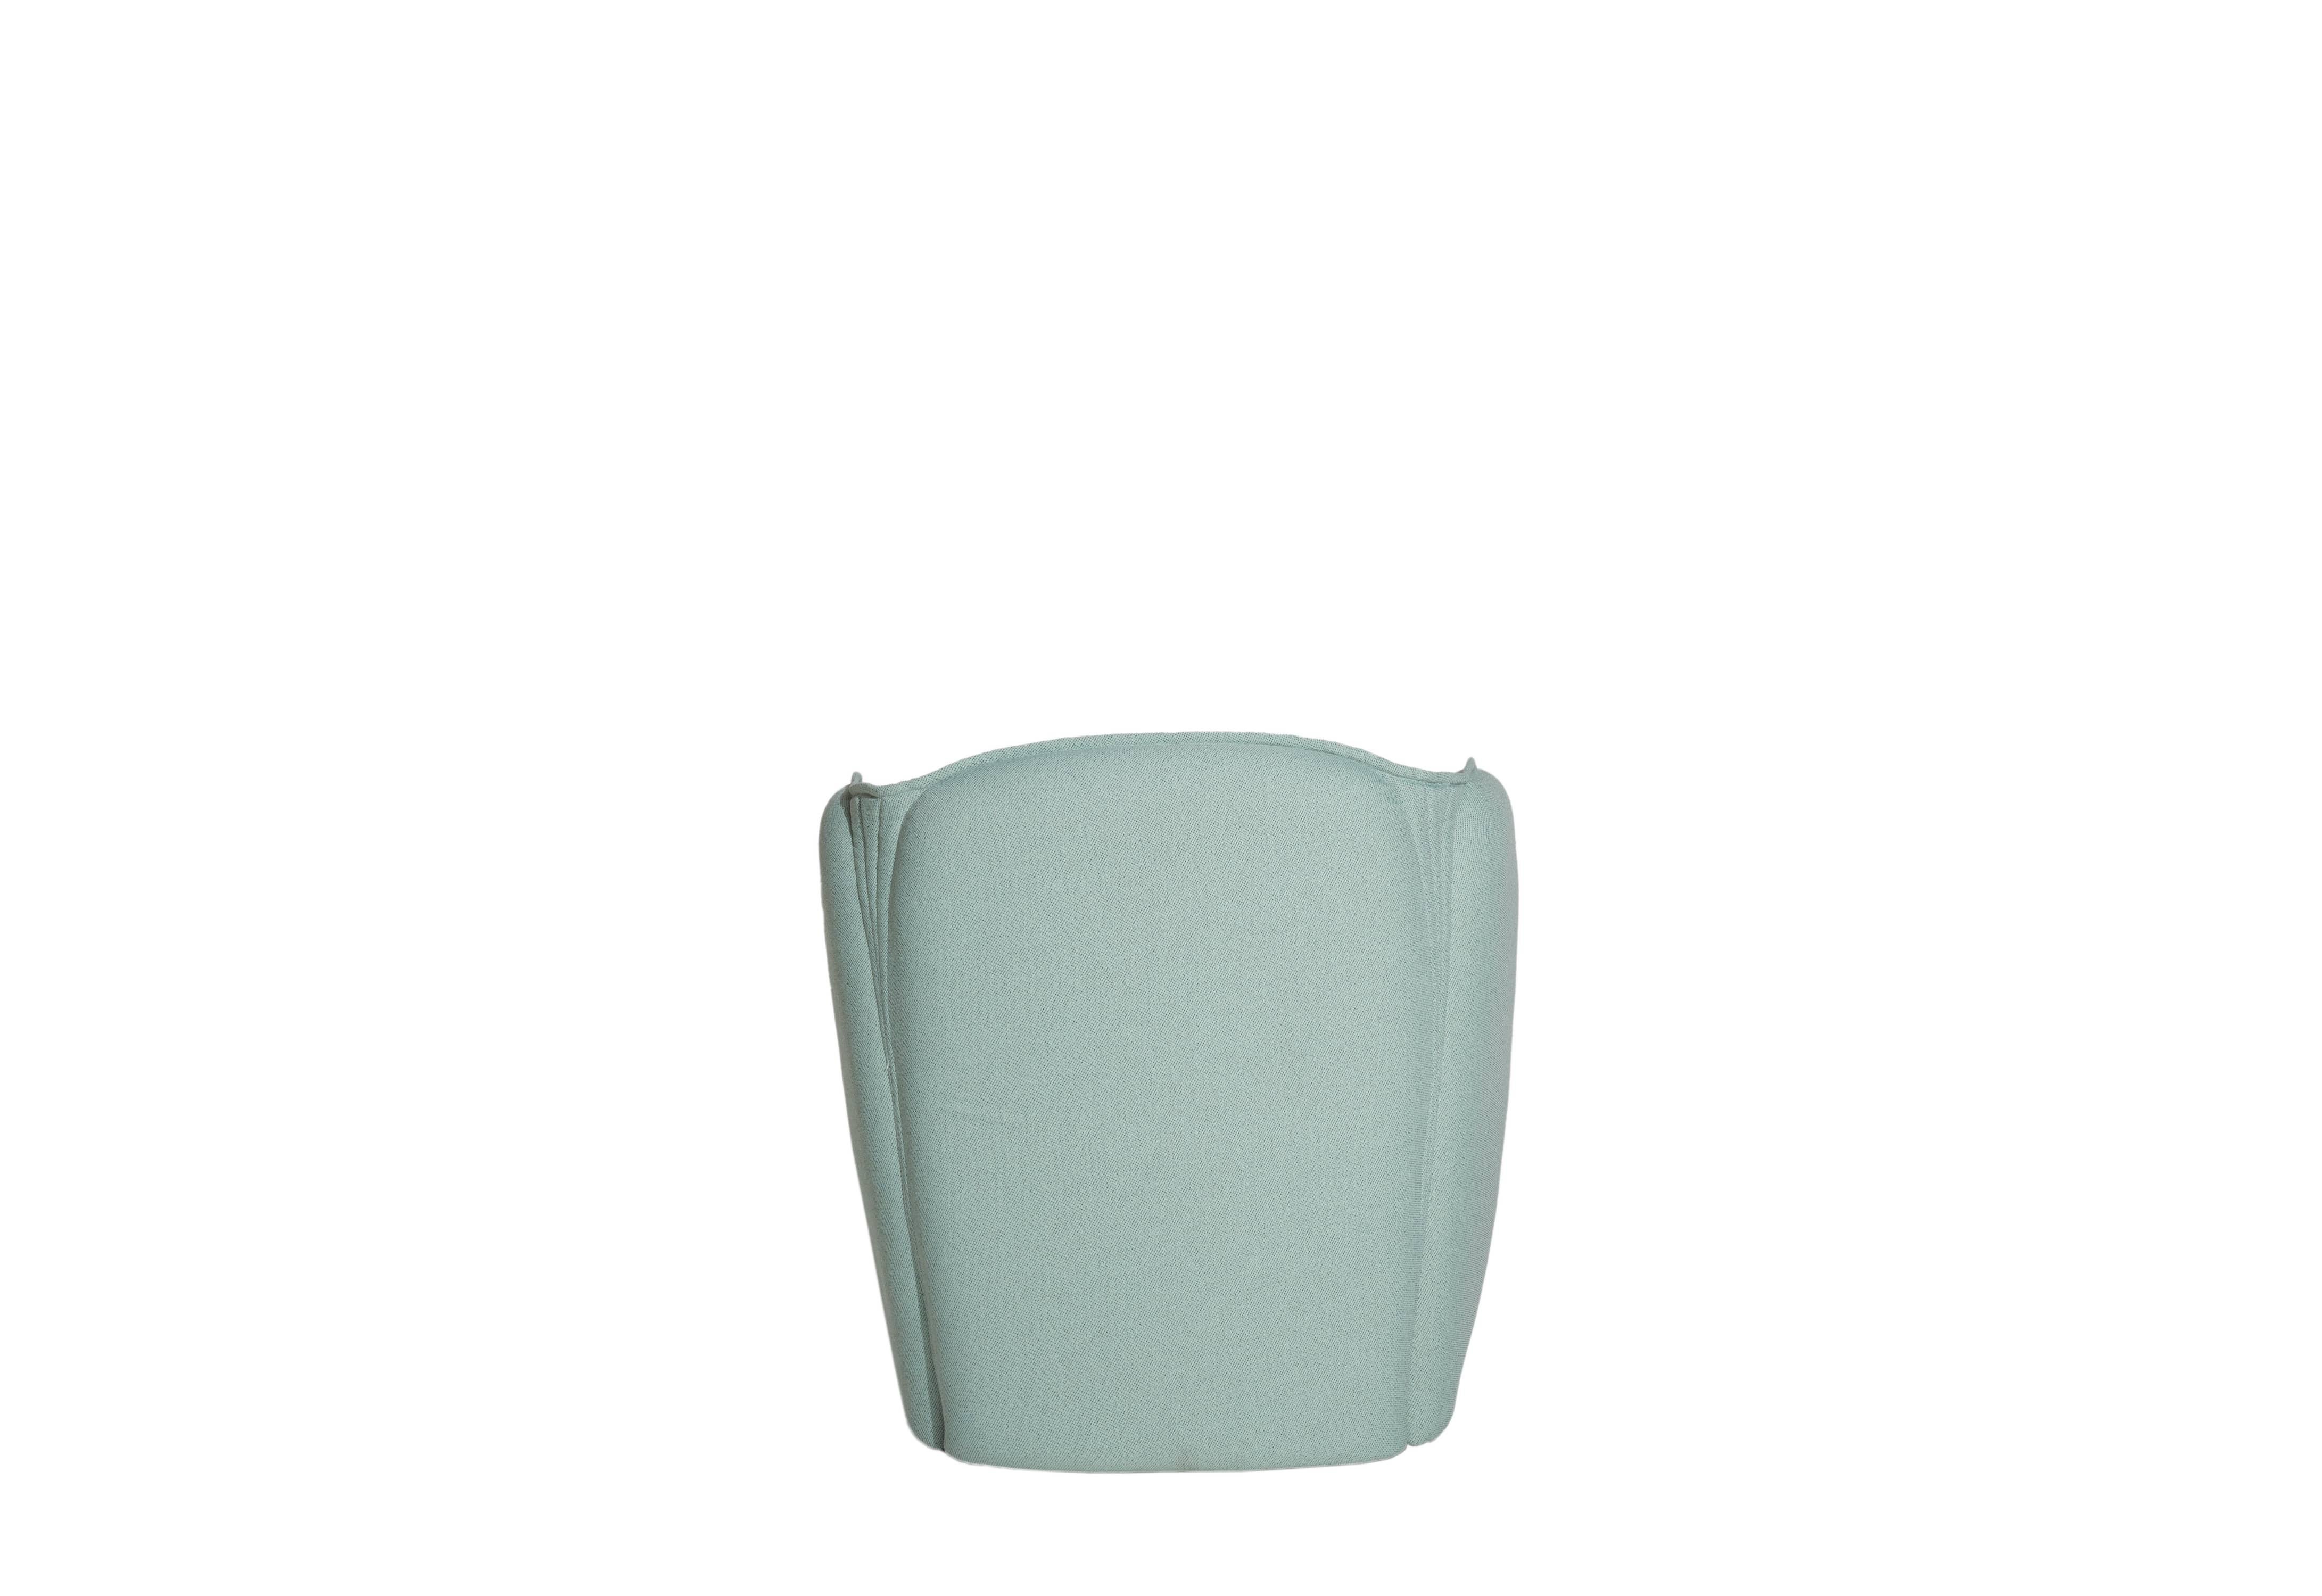 European Petite Friture Lily Armchair in Light Blue by Färg & Blanche, 2022 For Sale